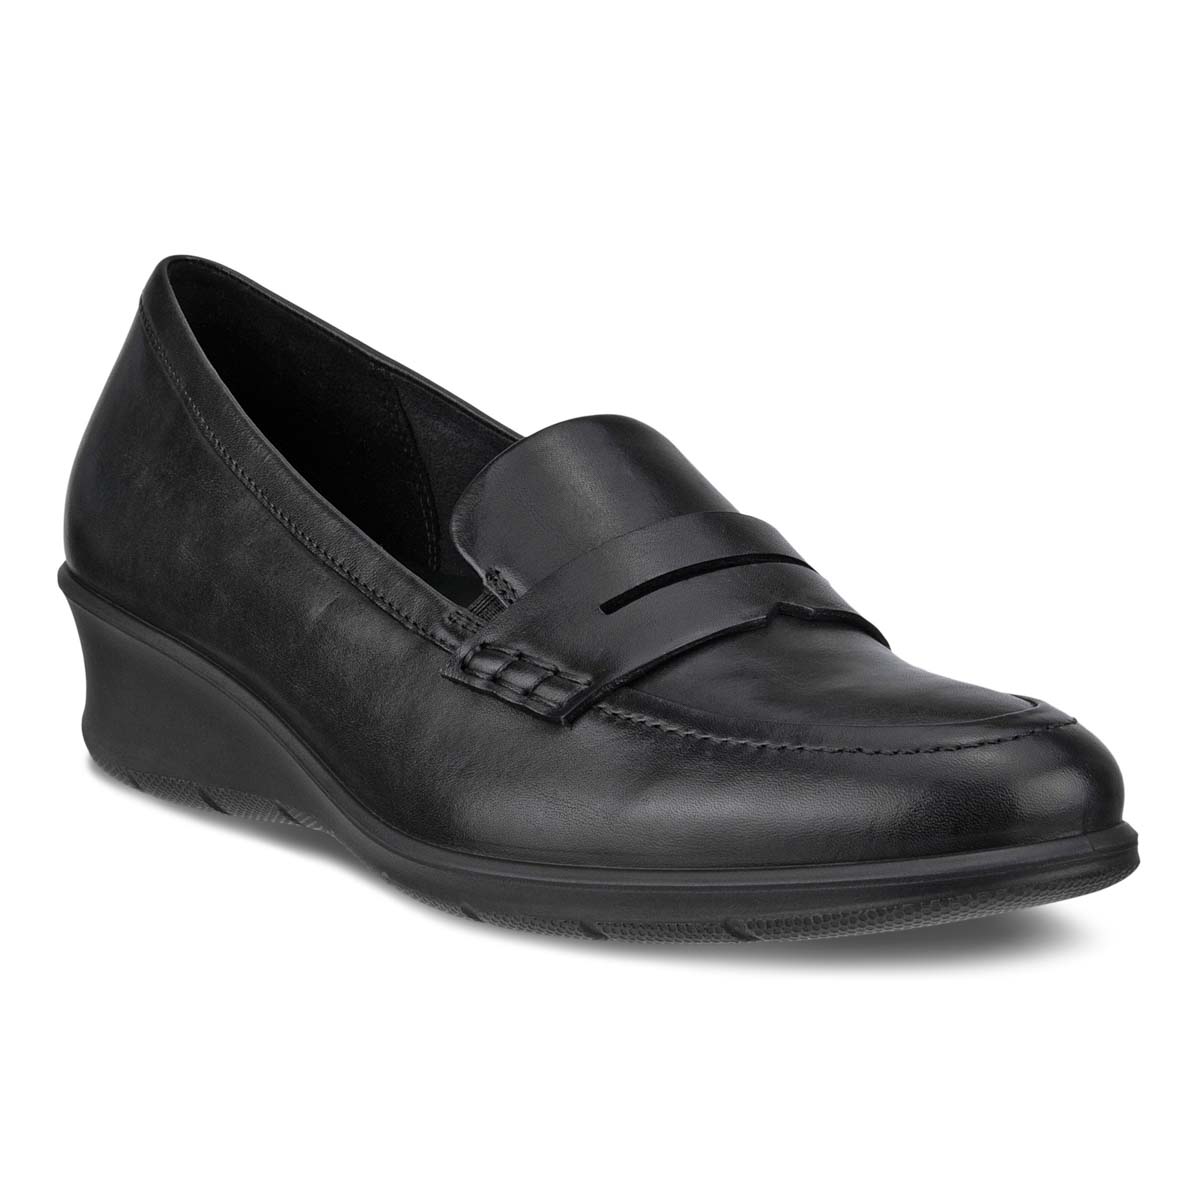 Ecco Felicia Loafer Black Leather Womens Comfort Slip On Shoes 217323-01001 In Size 37 In Plain Black Leather